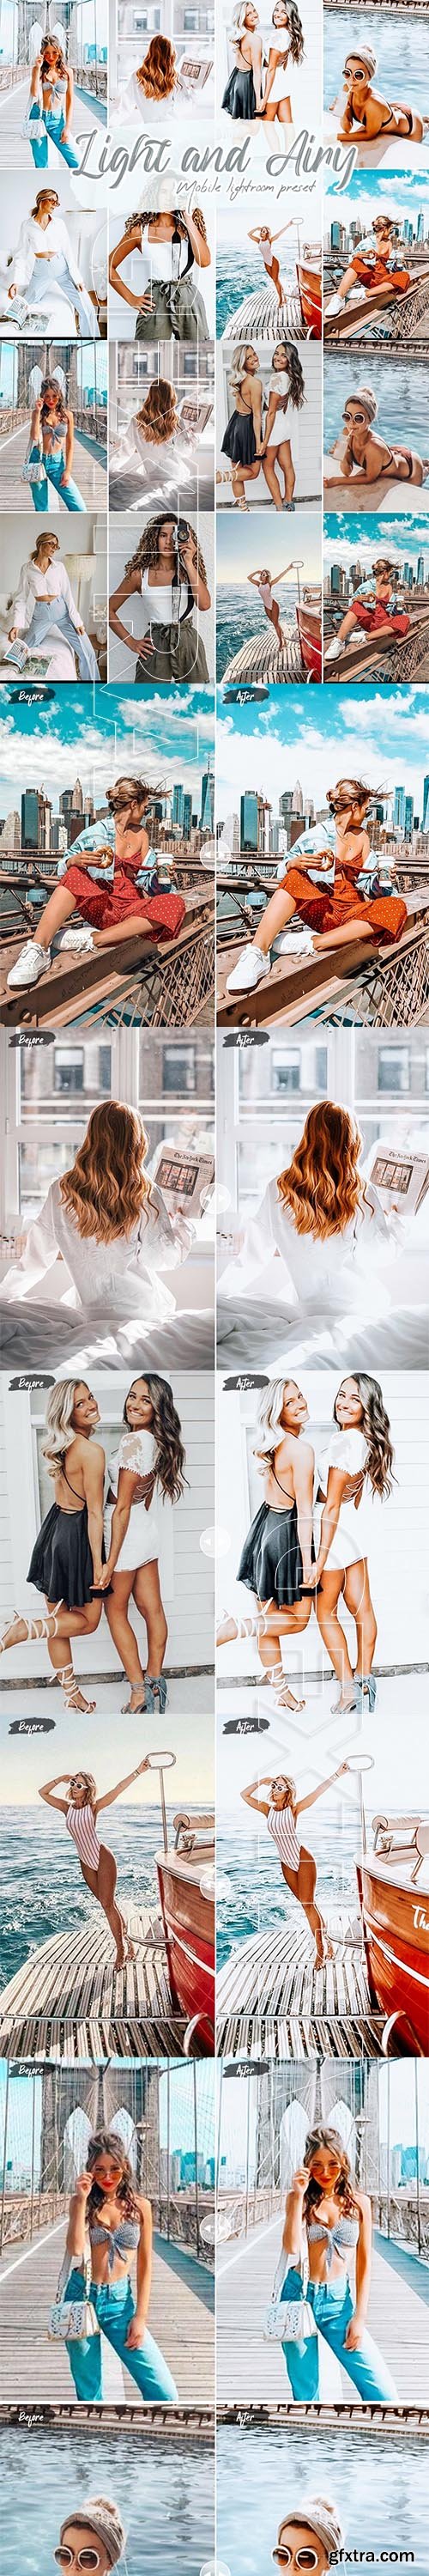 CreativeMarket - Light and Airy Lightroom Presets 5804096